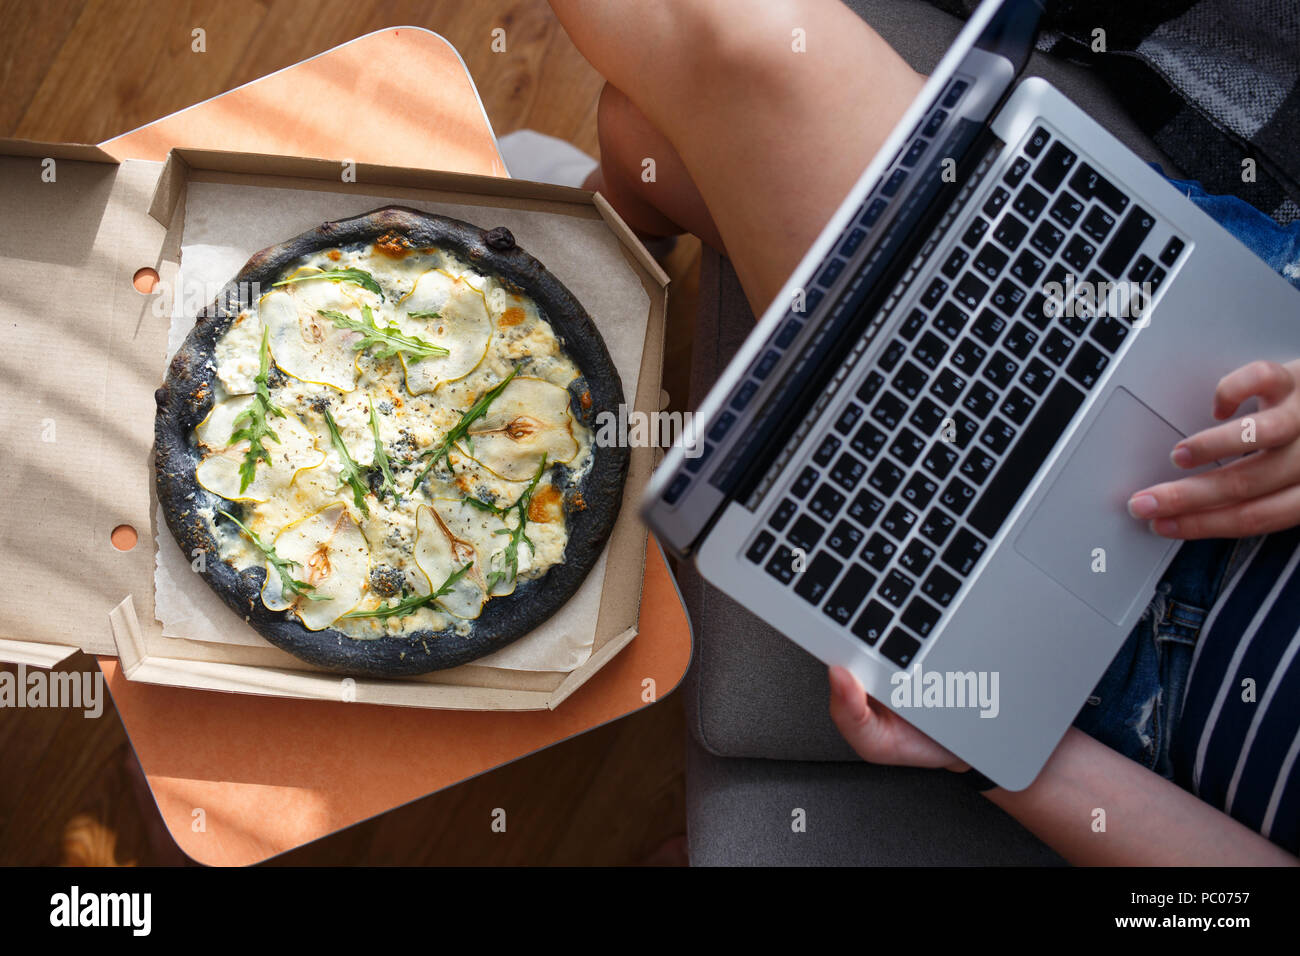 Young woman working on laptop with delivered pizza Stock Photo